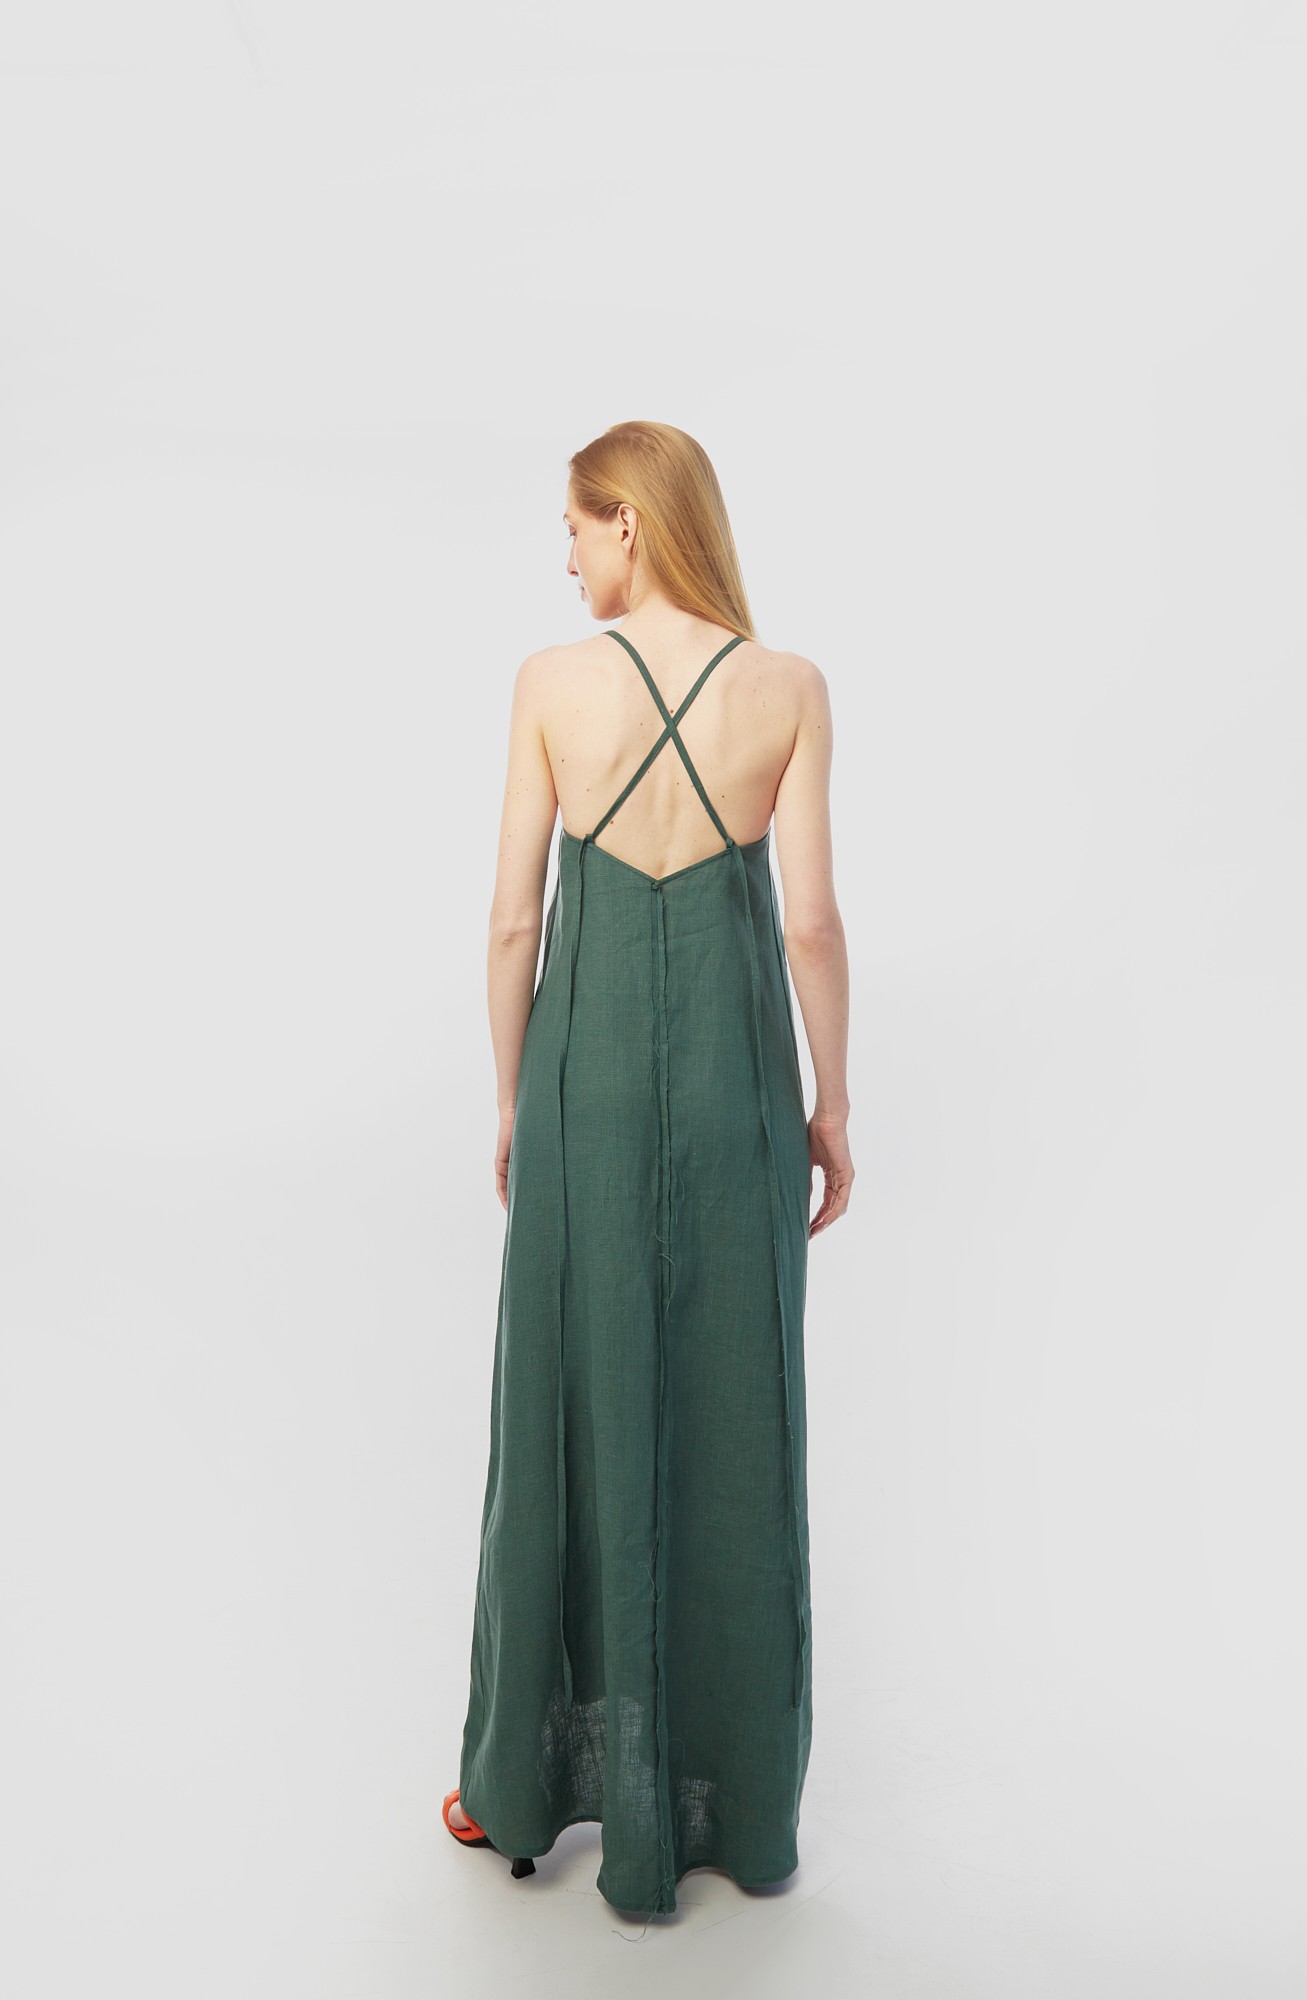 Linen sundress with long straps and raw back seam. Fern color. Kvit Collection